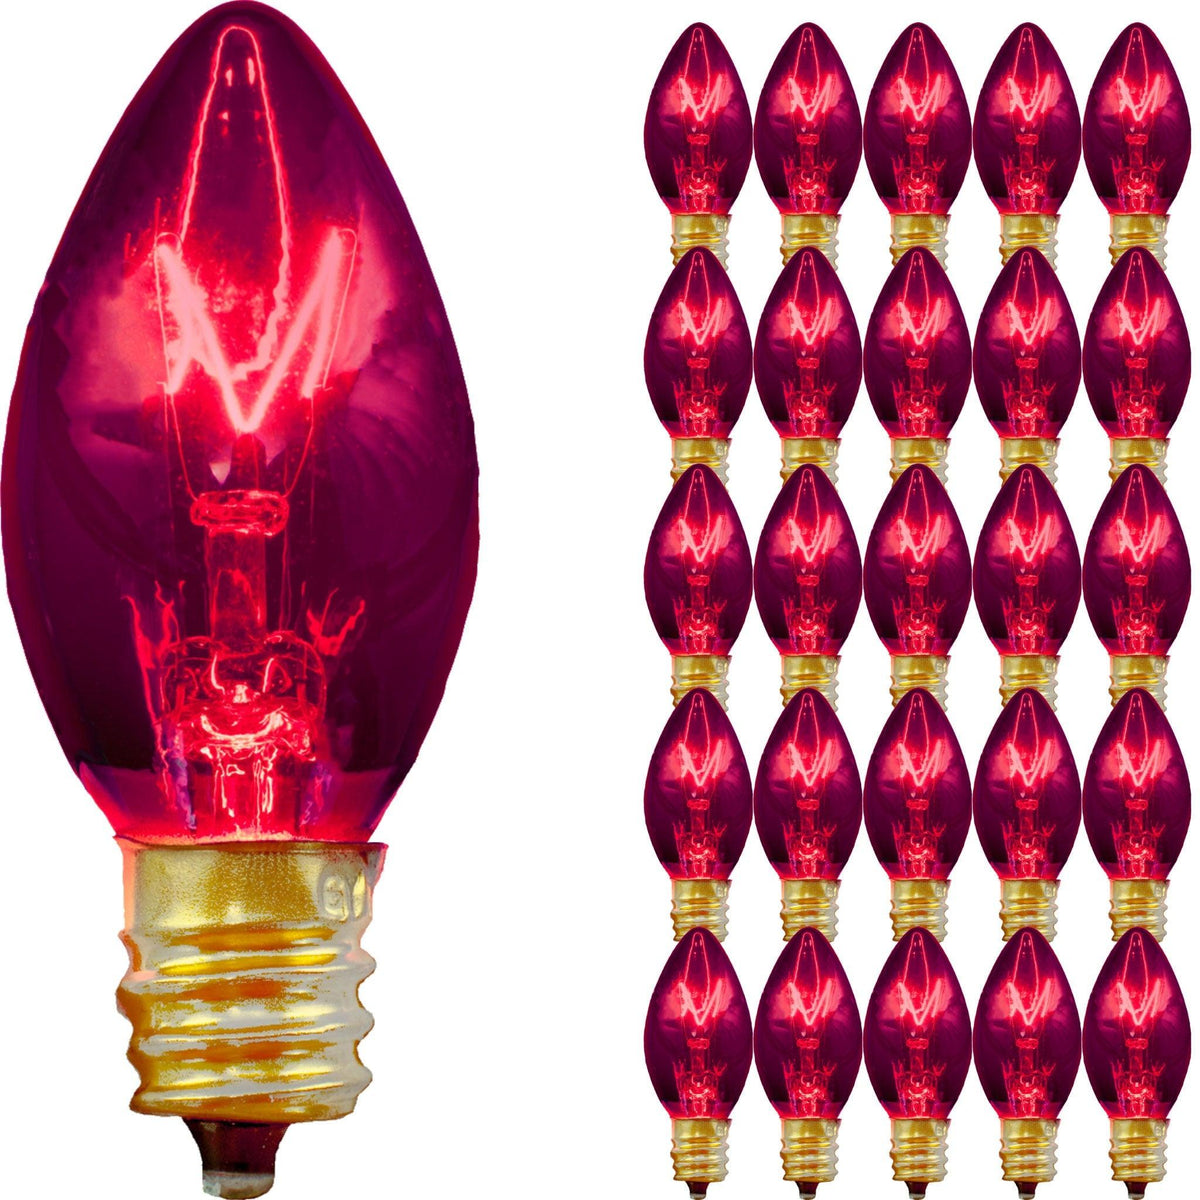 C-7 & C-9 Transparent Purple Candelabra Christmas Light Bulbs sold in a pack of 25 from leedisplay.com